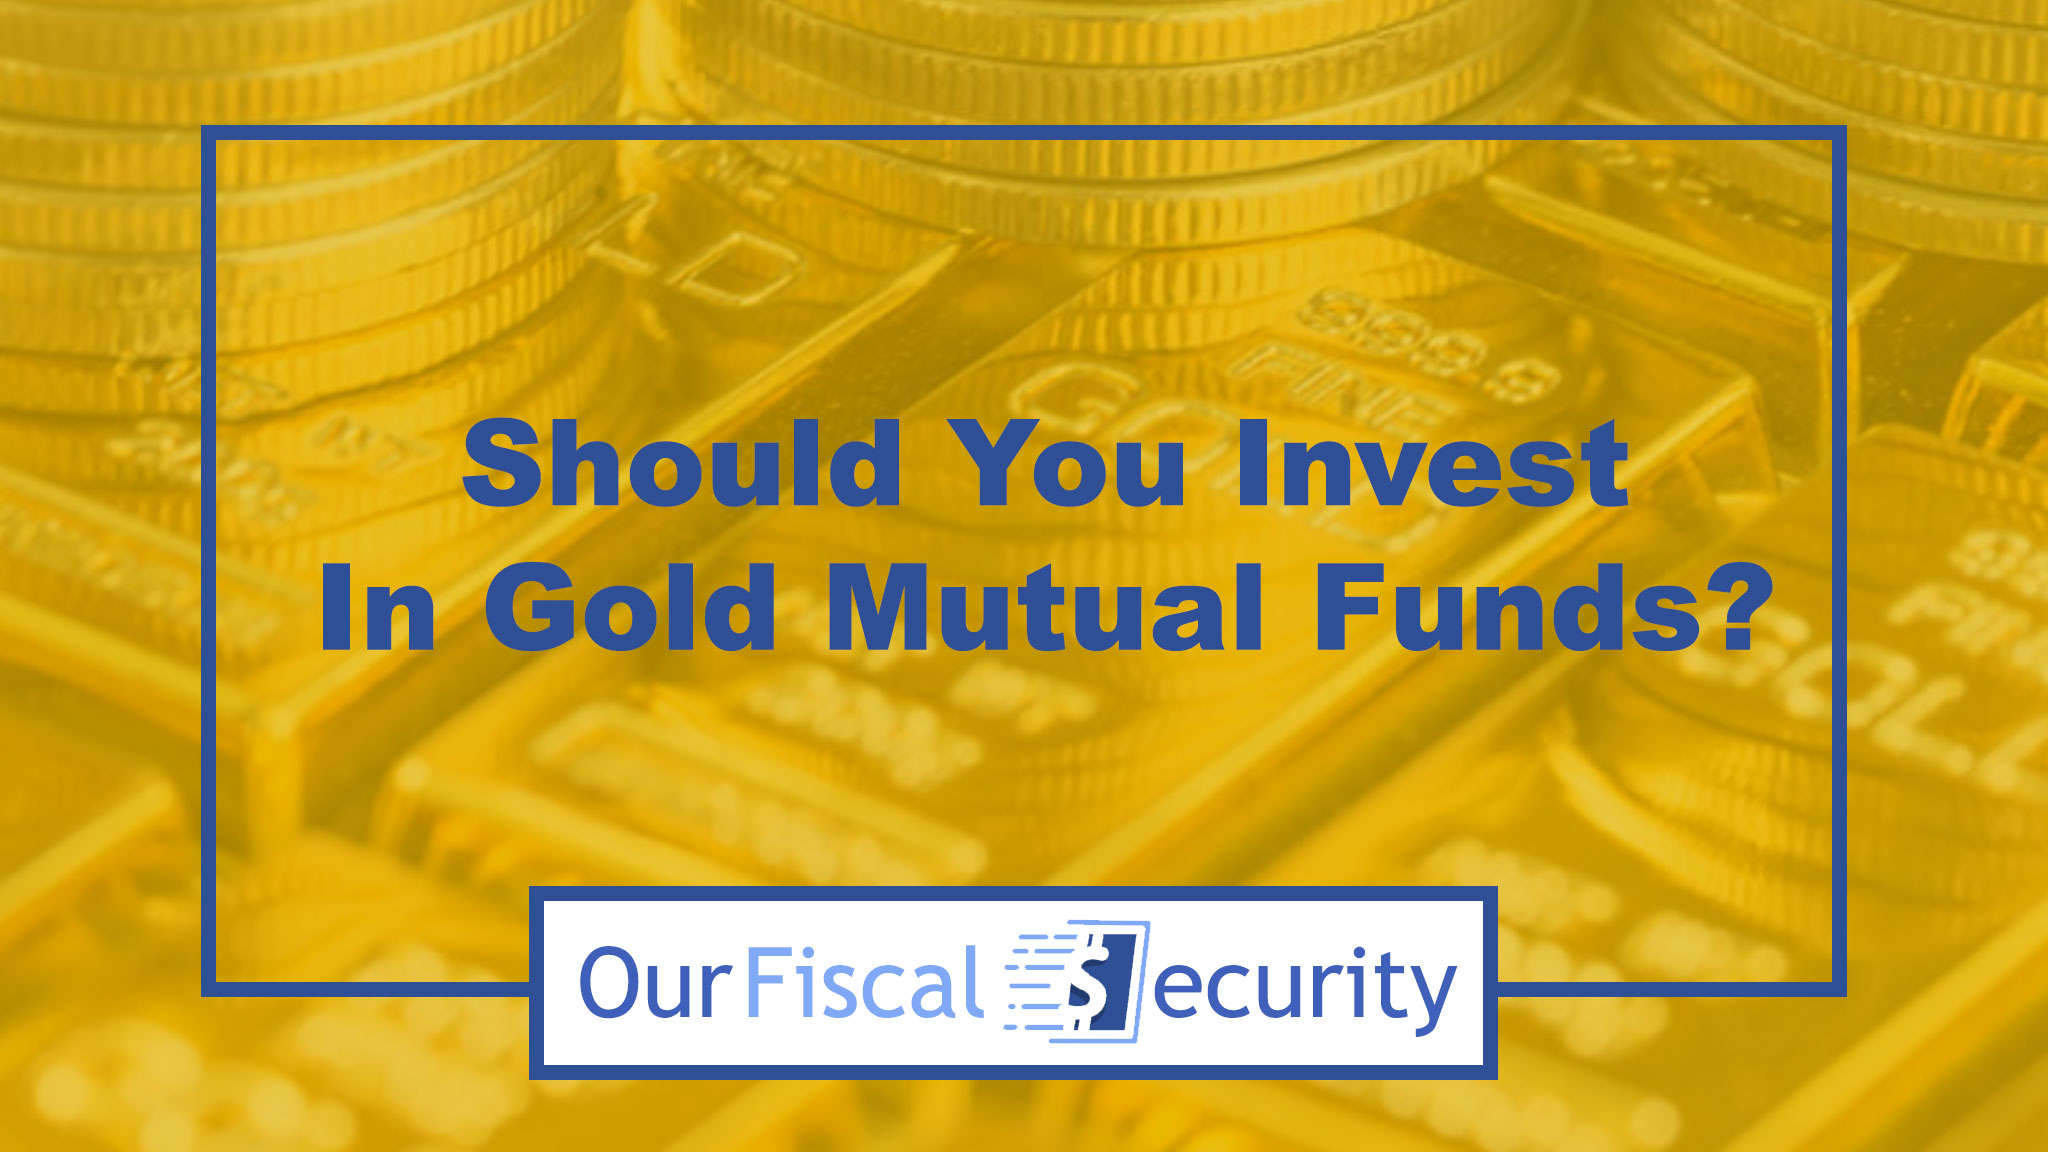 Investing in gold mutual funds